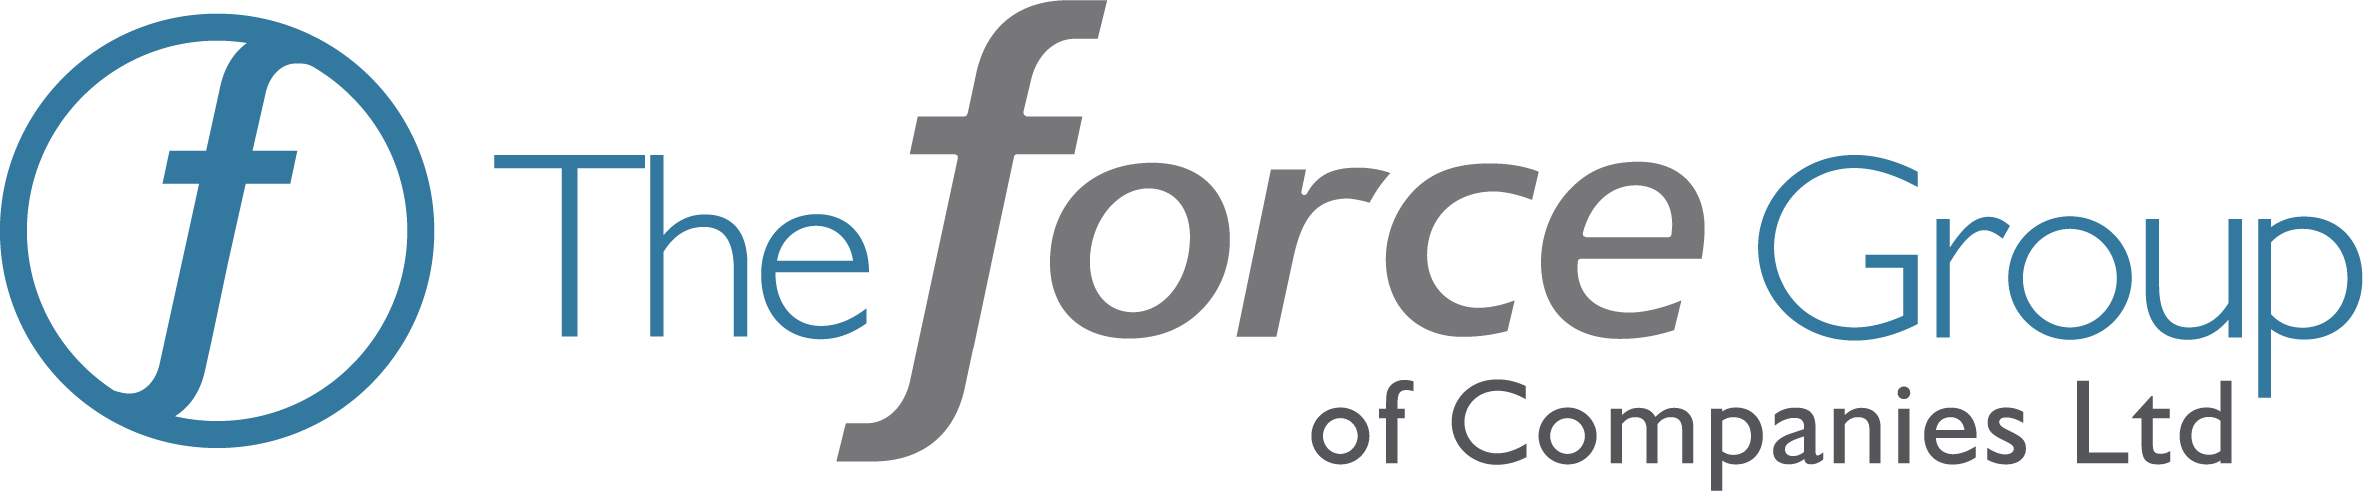 The Force Group Ltd